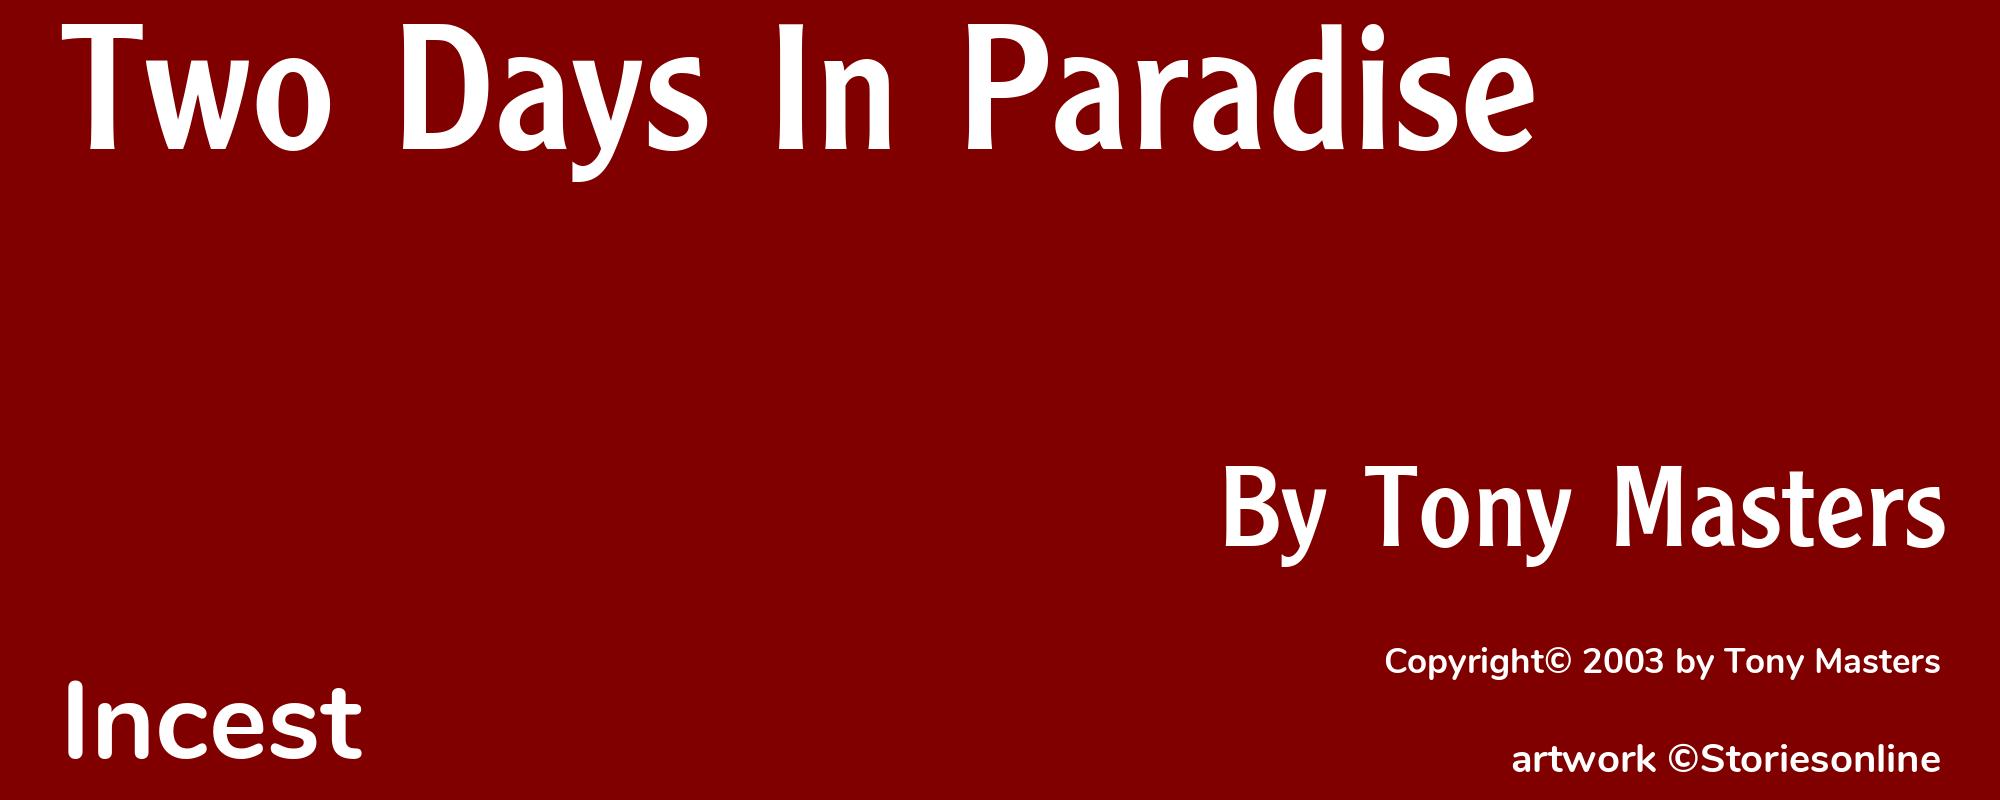 Two Days In Paradise - Cover